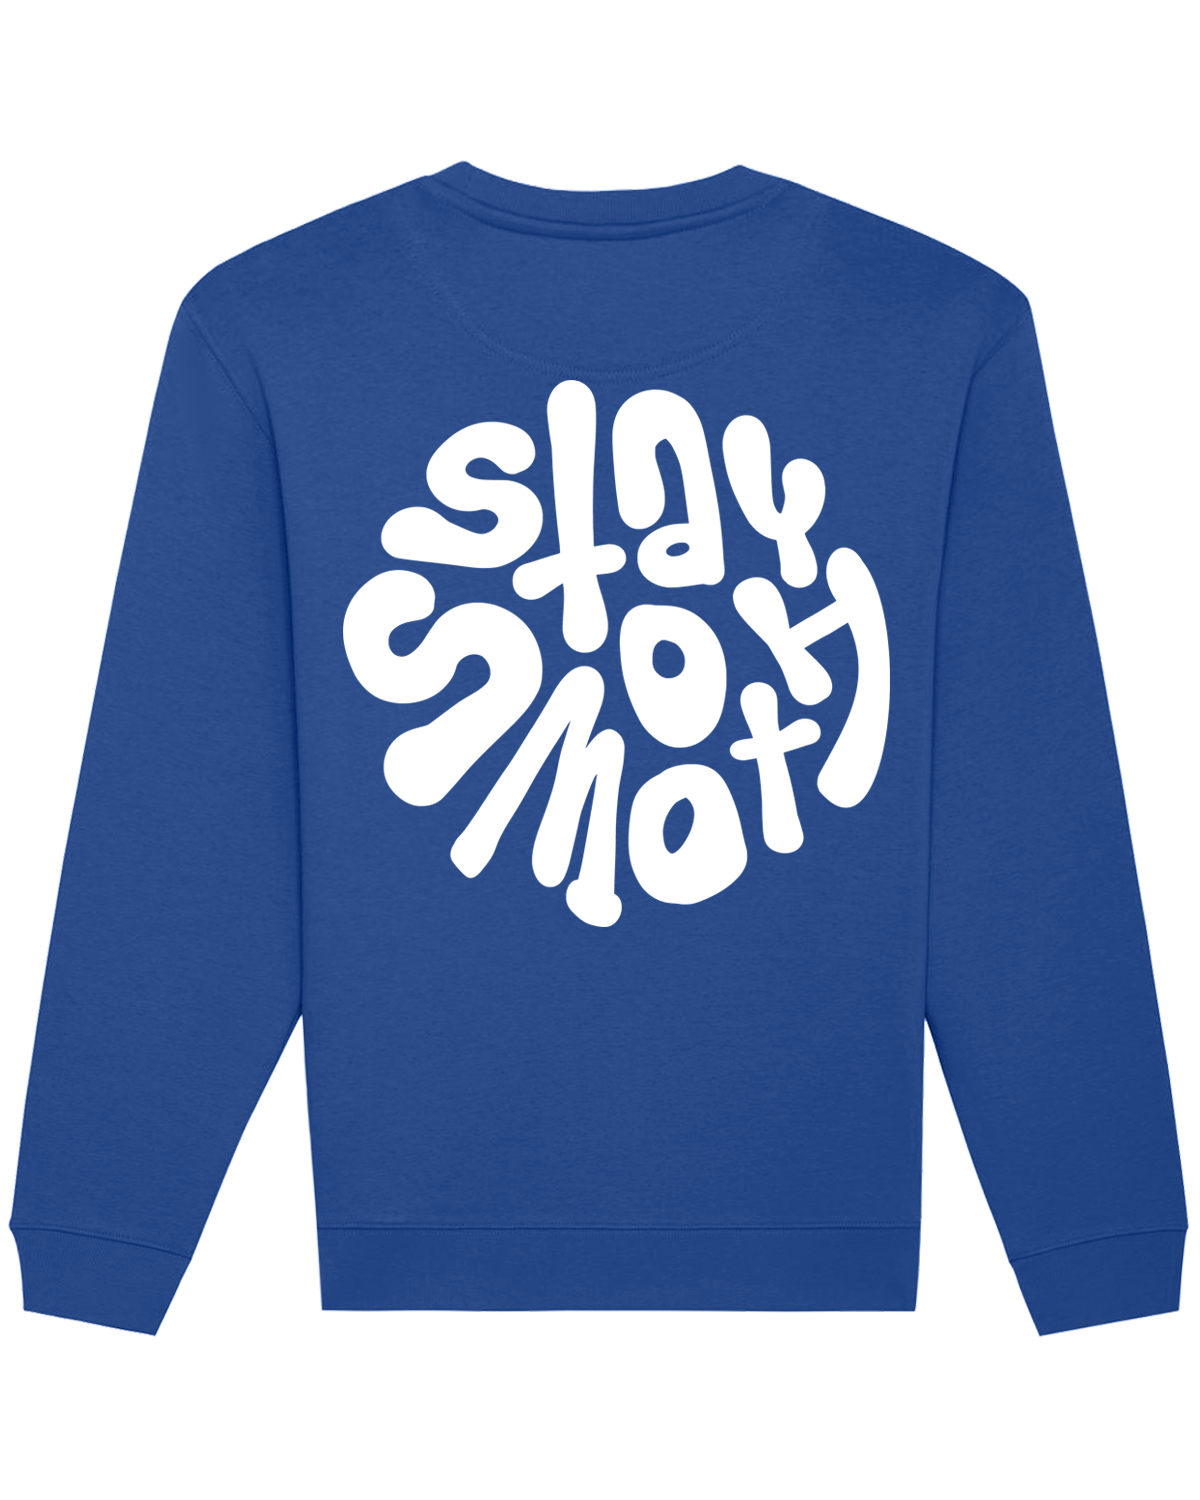 Blue Kids Crew / Stay Smooth White Front+Back Girls